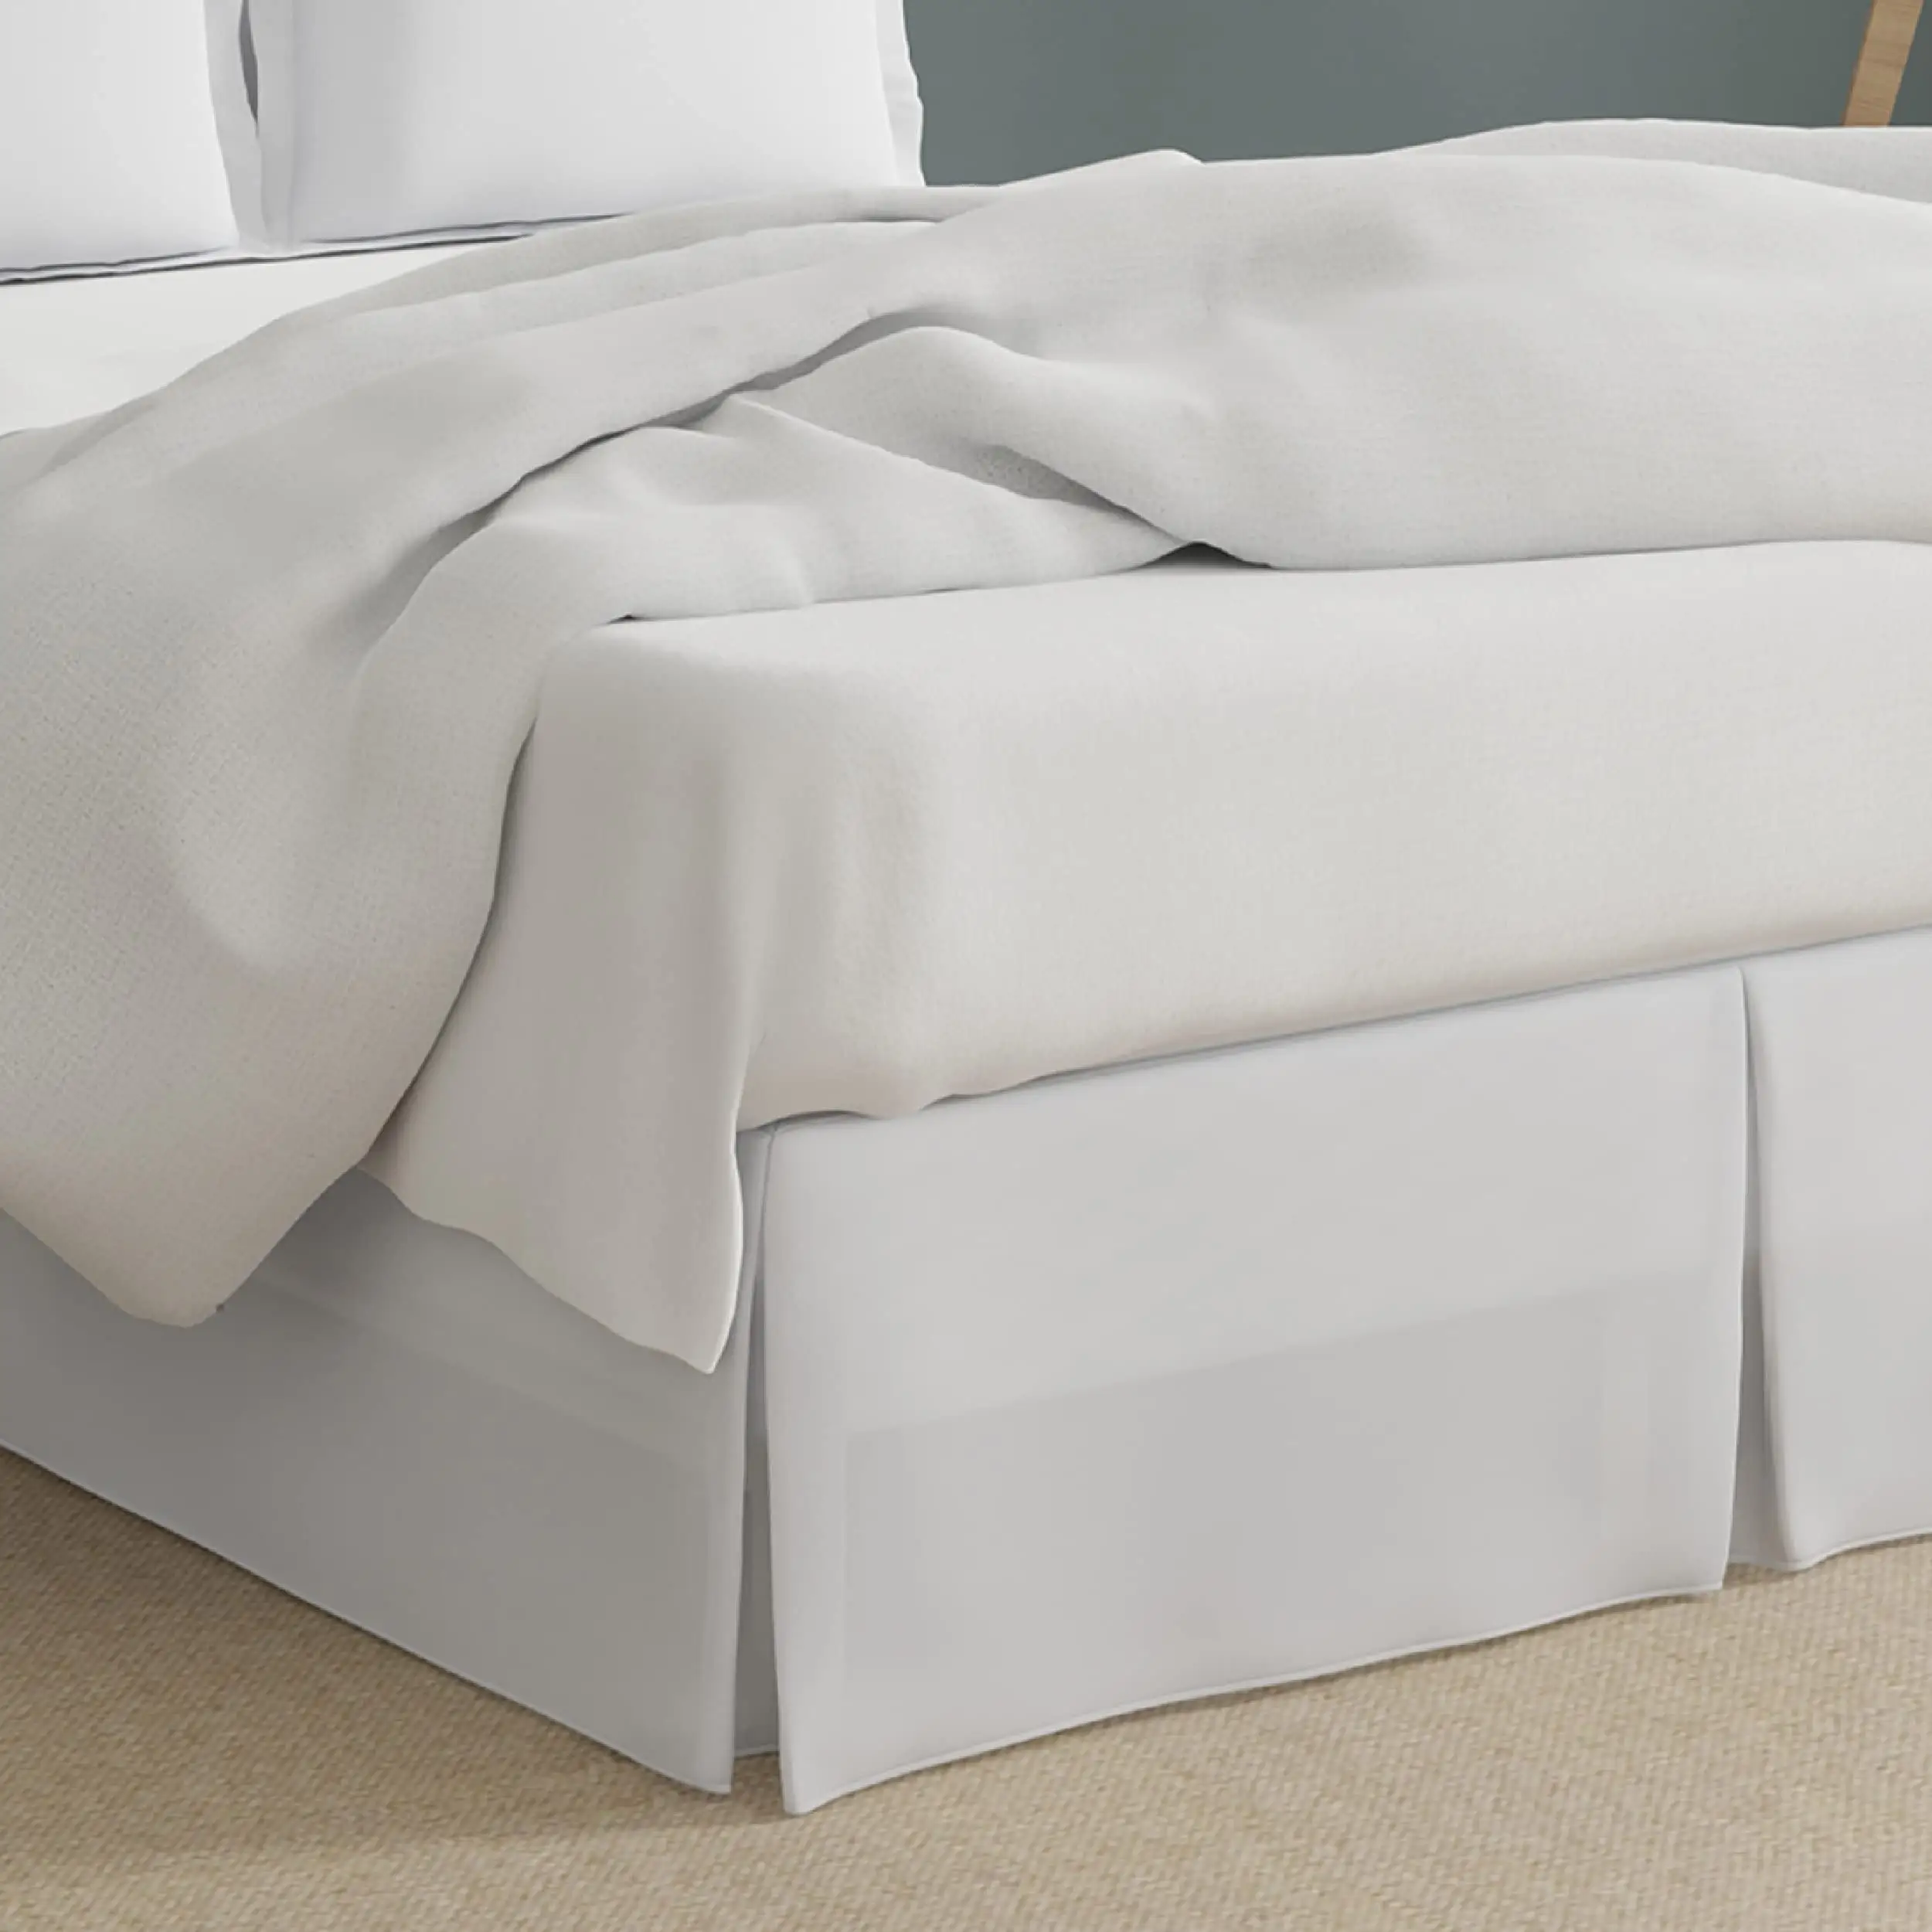 New Arrival Low Maintenance Wrinkle Resistant Bedskirt White Wrap Around Bed Skirts